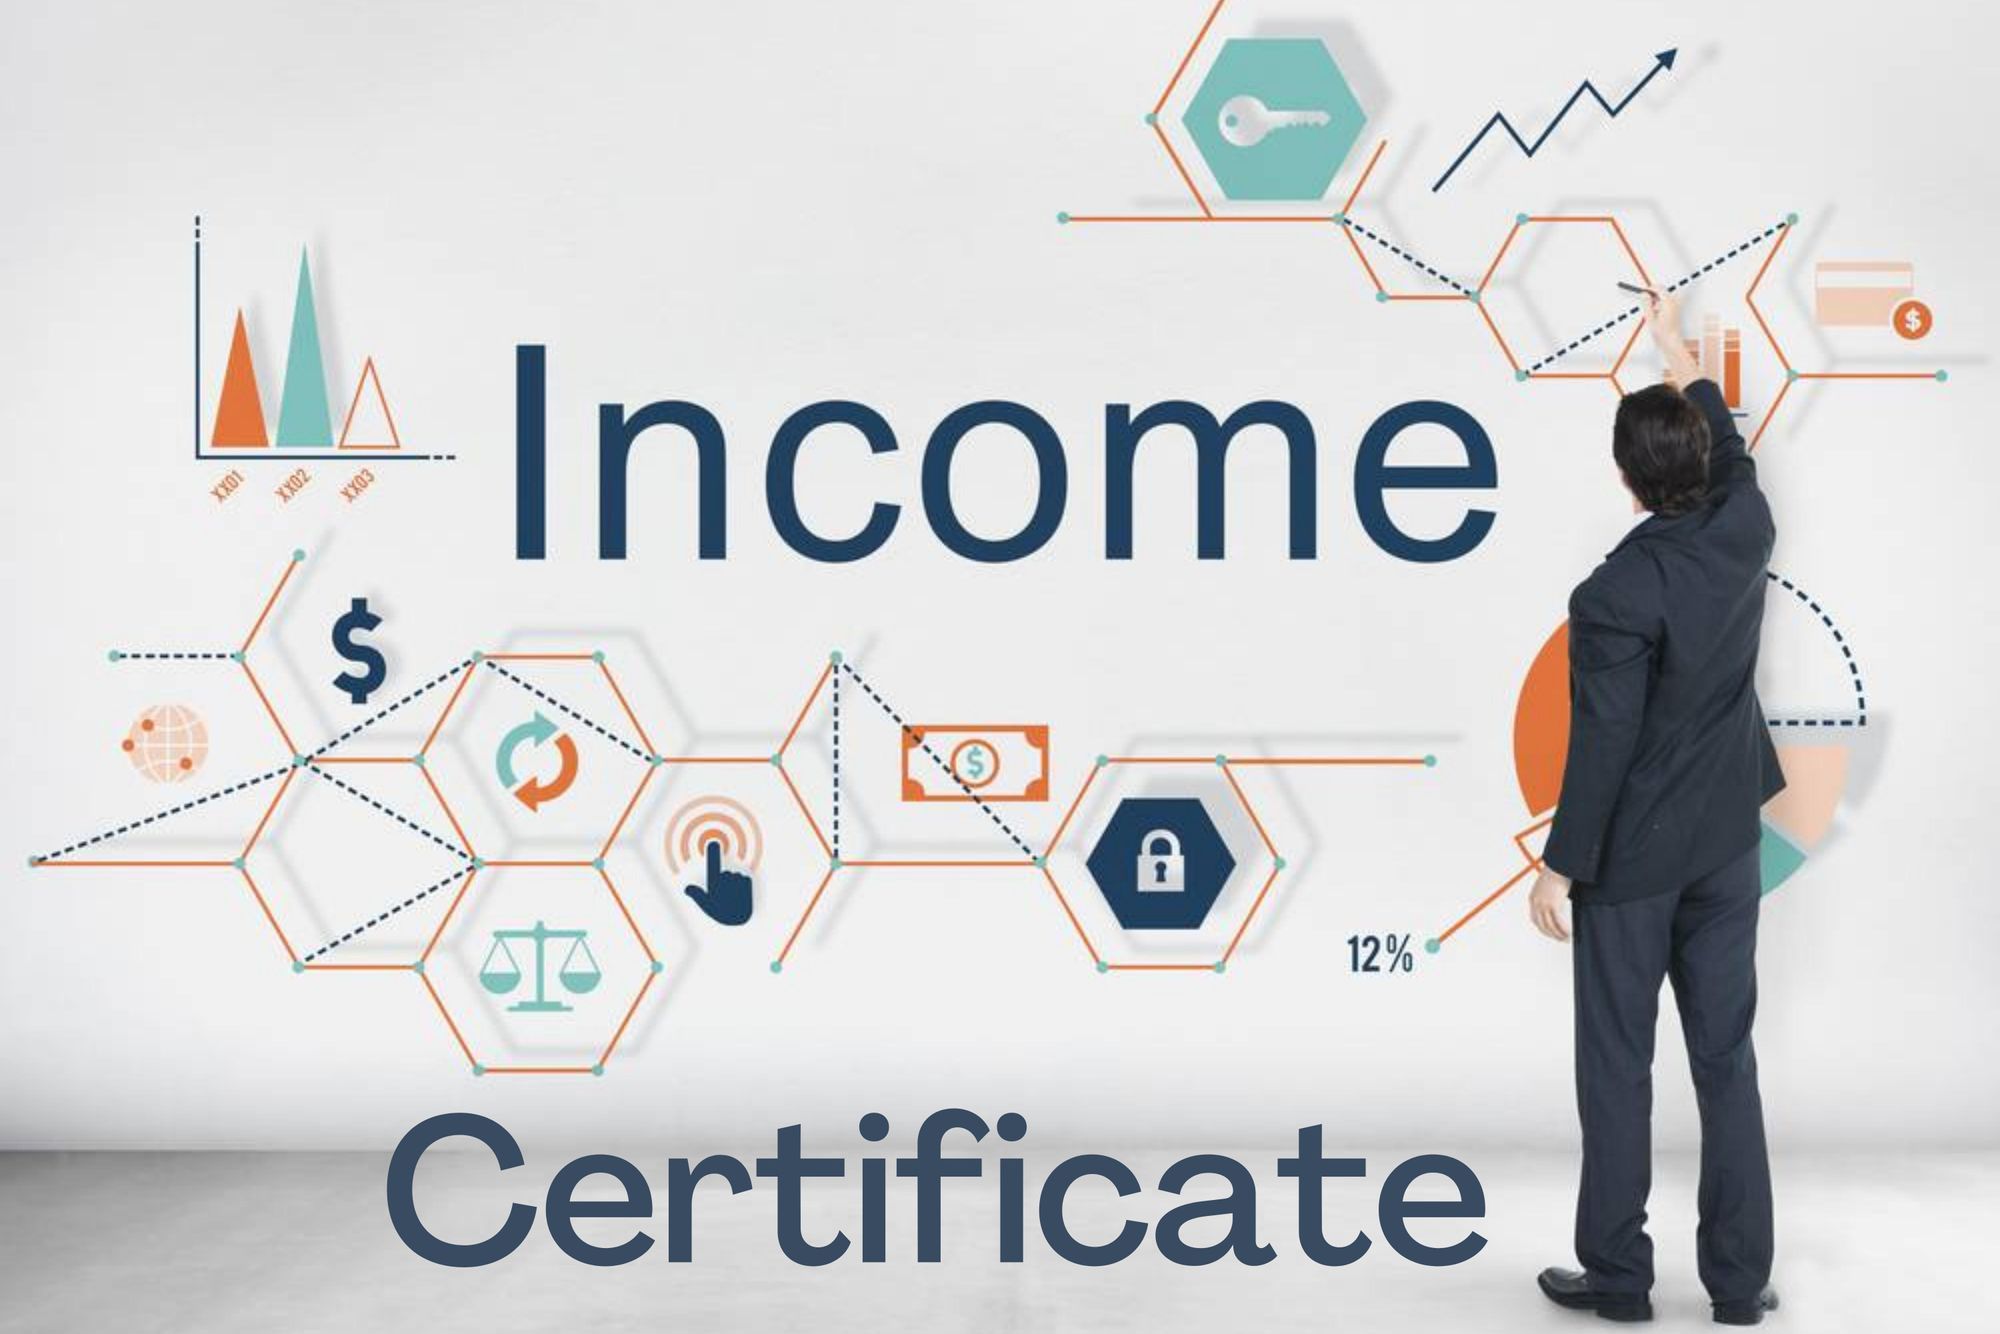 How to Get Income Certificate Online?